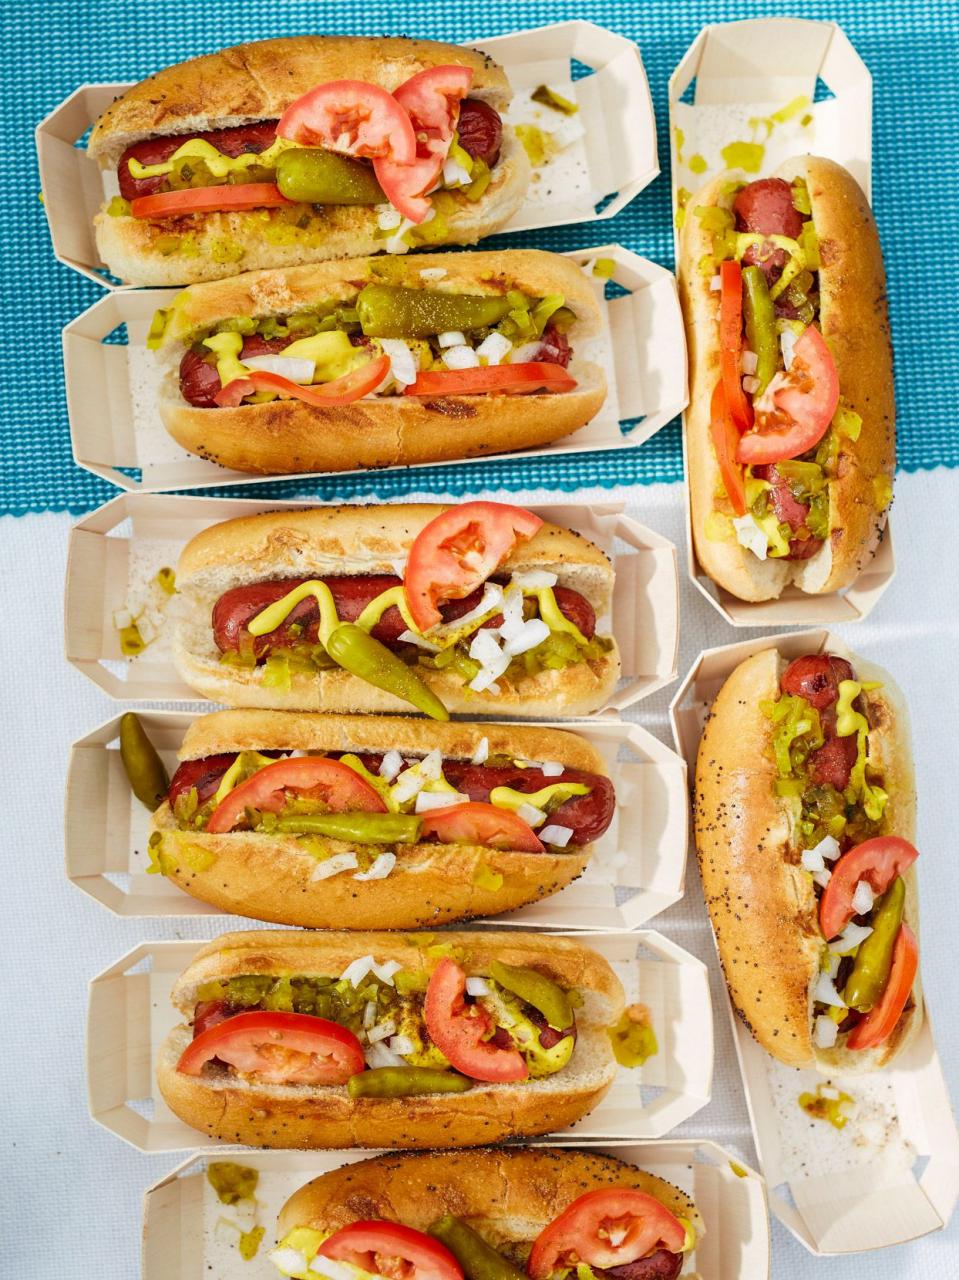 6 Fat-Free And Low-Fat Hot Dogs That Still Taste Great